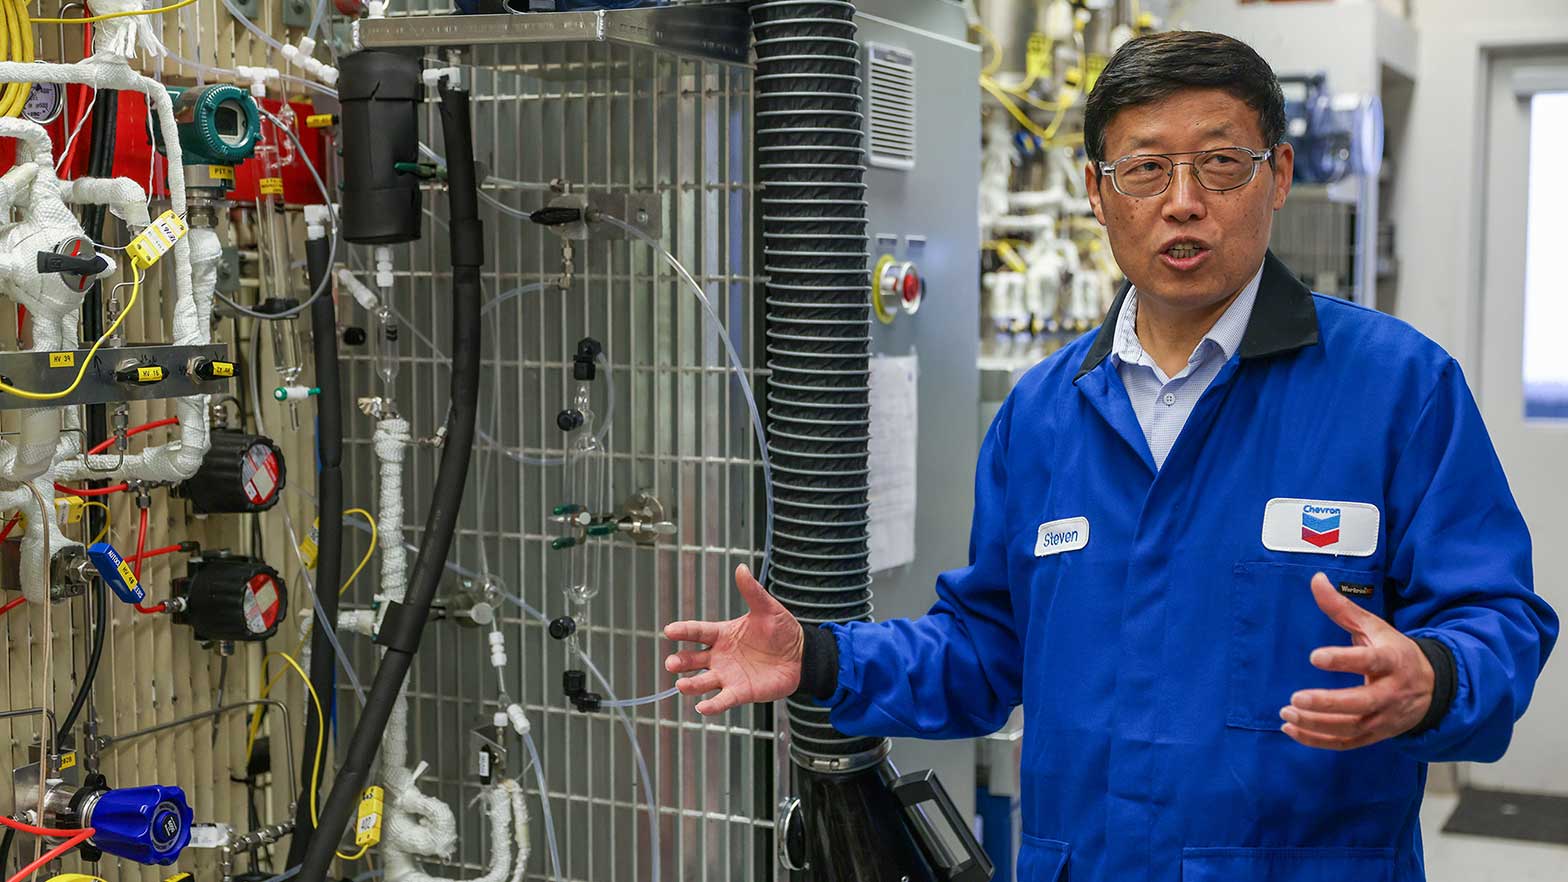 Steven Song, a Chevron consulting engineer, explains the technology behind more efficient hydrogen transportation.